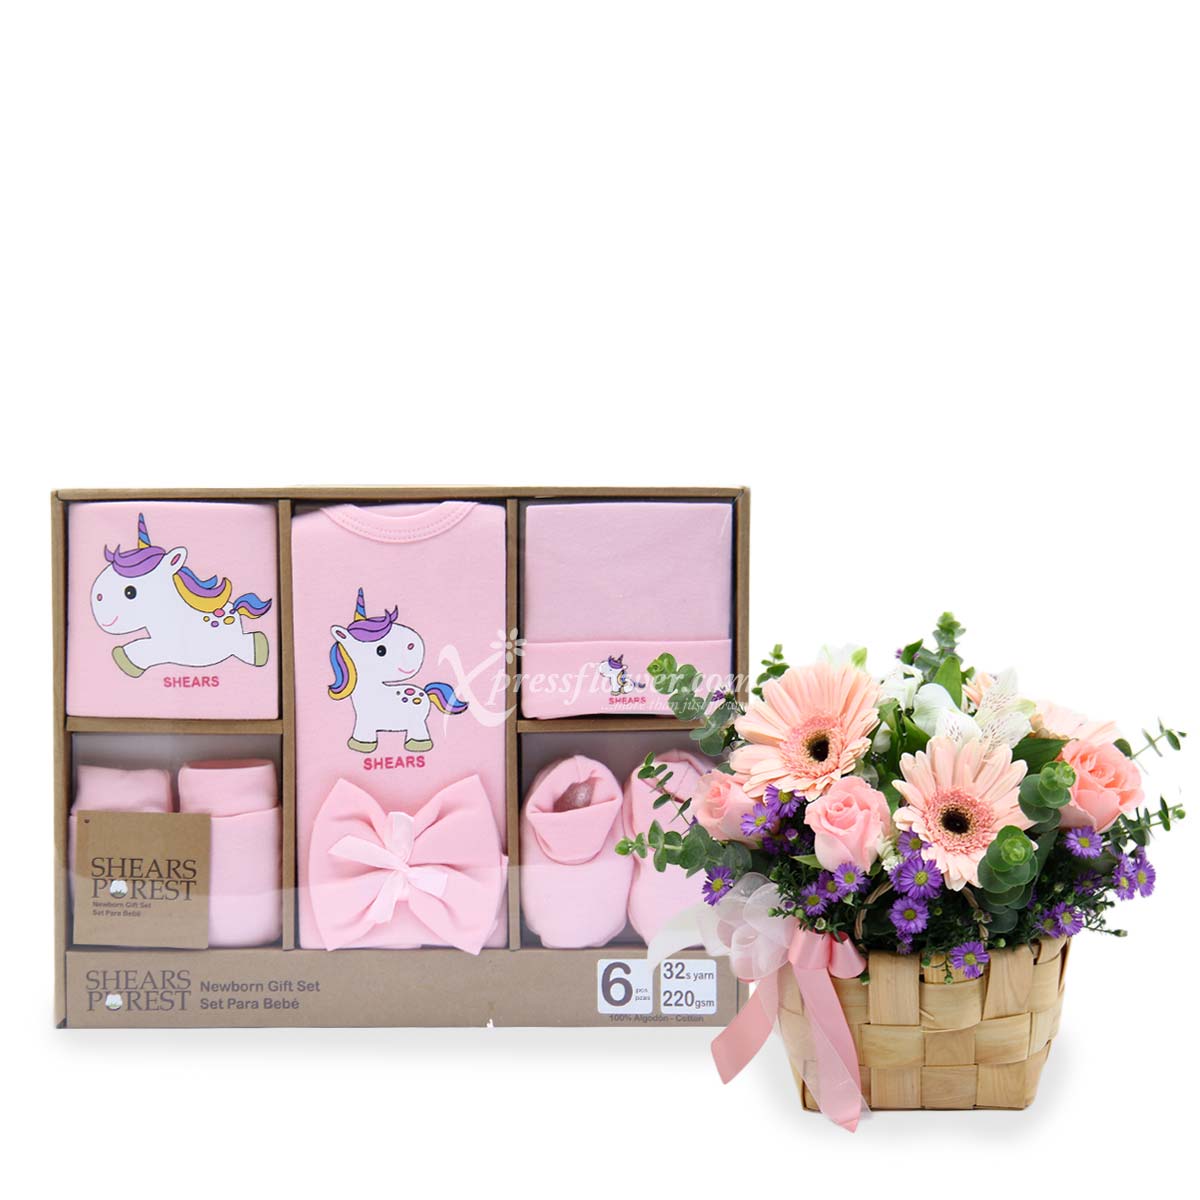 Girl Power (6 Pink Gerberas & 6 Pink Roses with Shears Purest 6pcs Gift Set)